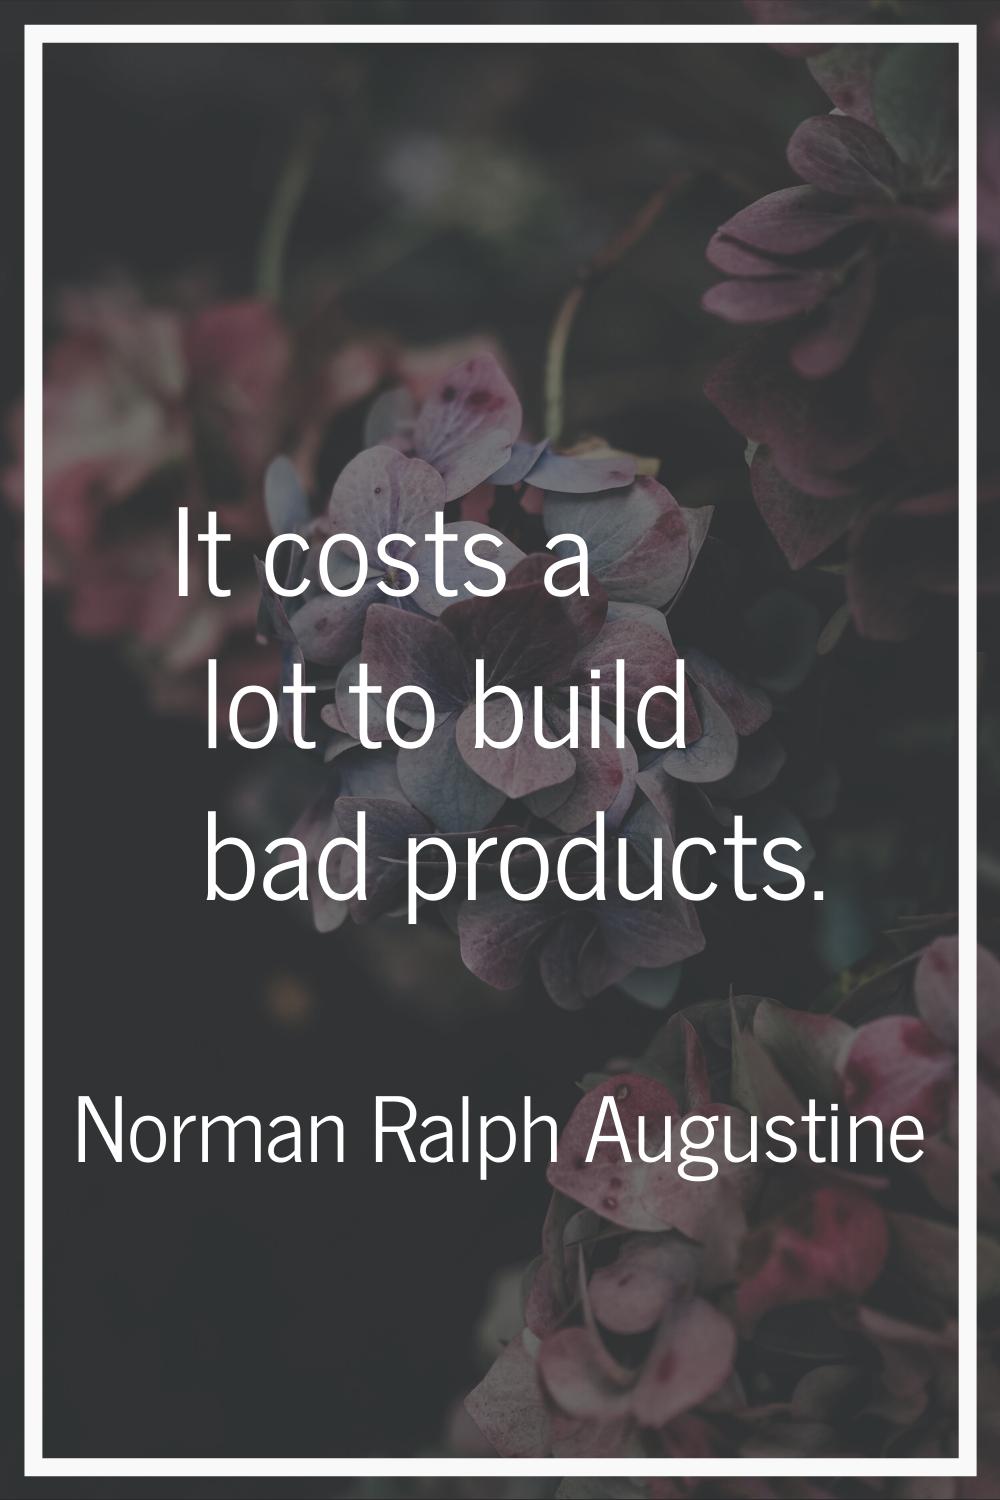 It costs a lot to build bad products.